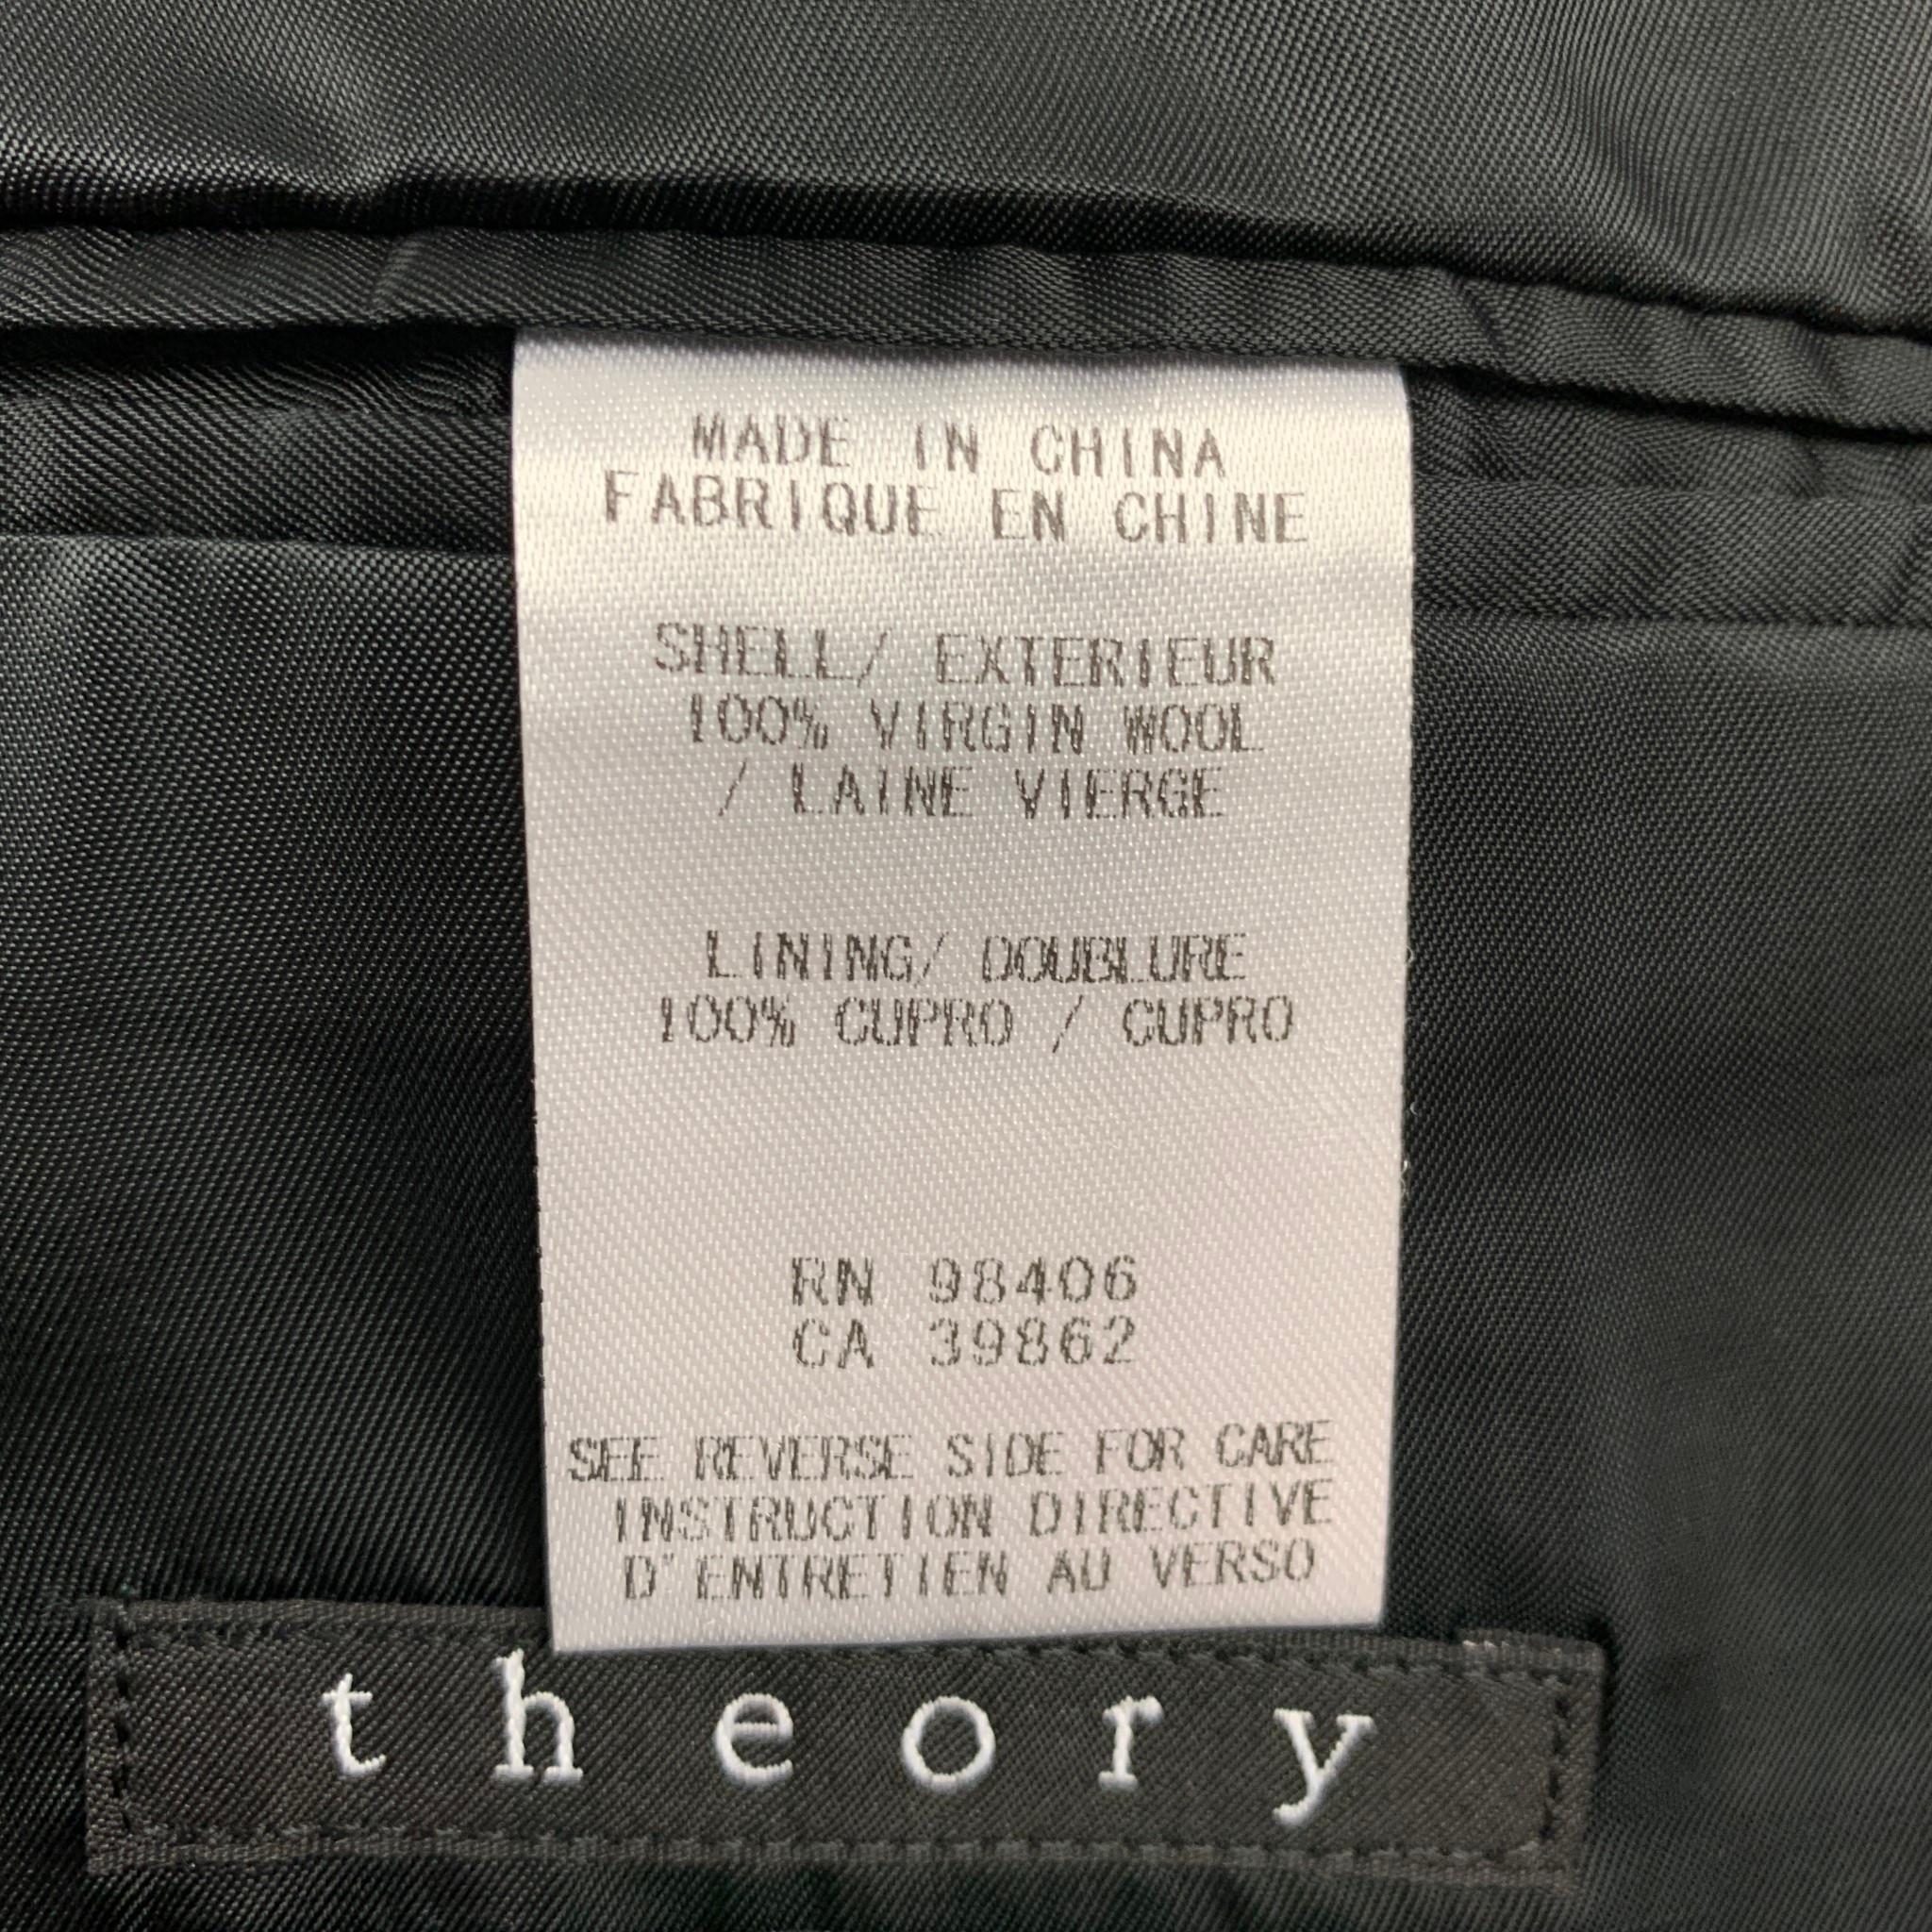 THEORY sport coat comes in a navy & black wool with a full liner featuring a notch lapel, flap pockets, and a single button closure.

Very Good Pre-Owned Condition.
Marked: 40 Regular

Measurements:

Shoulder: 18 in.
Chest: 40 in.
Sleeve: 26